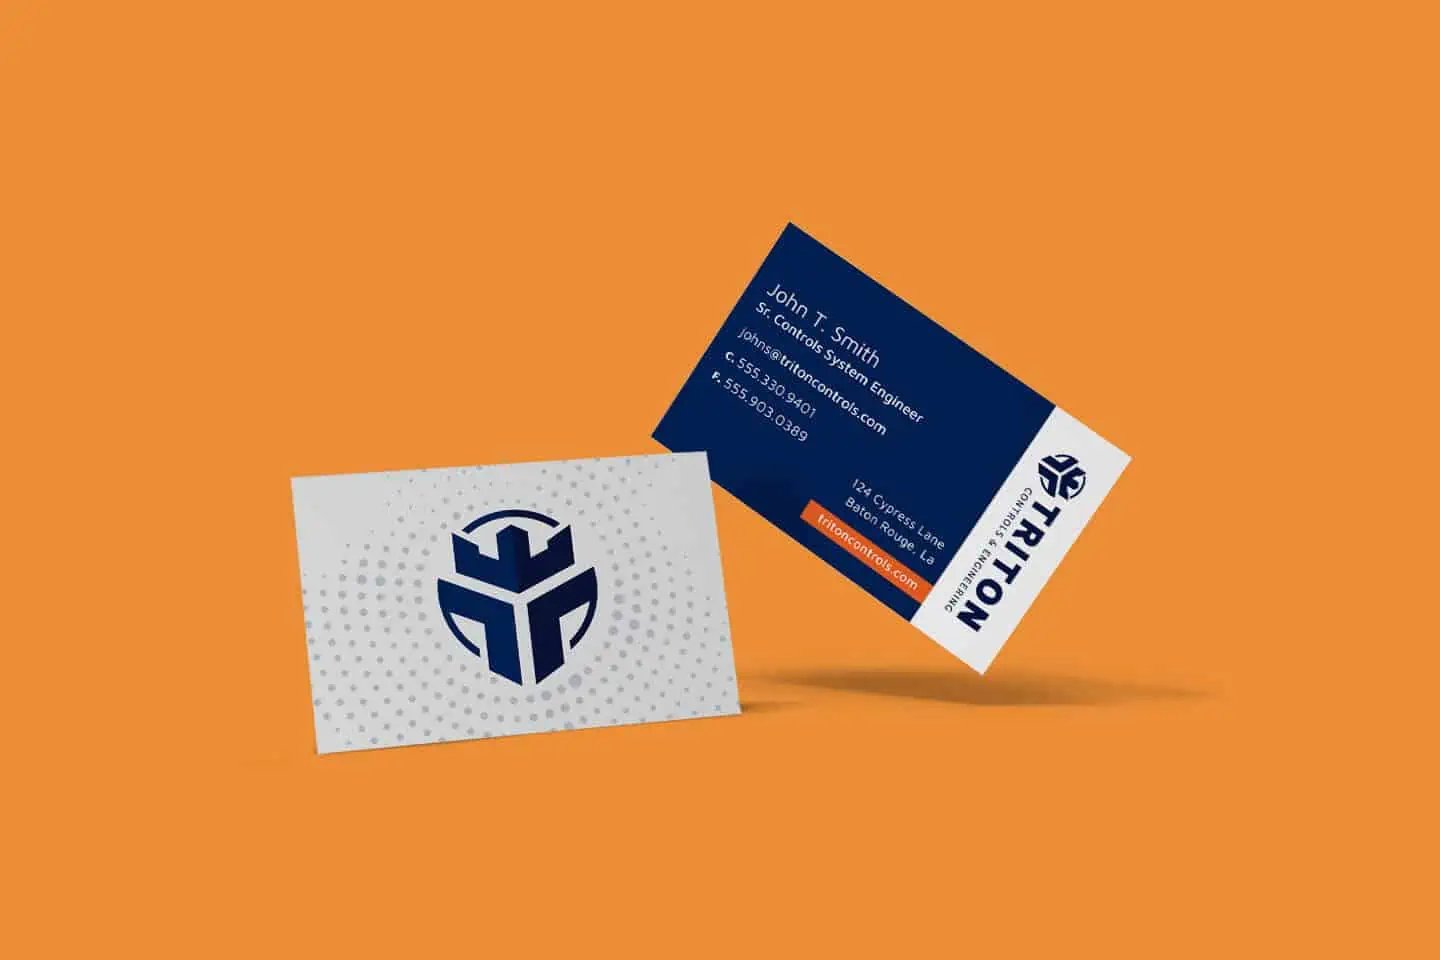 Business card design made for Triton by Catapult Creative Media in Baton Rouge